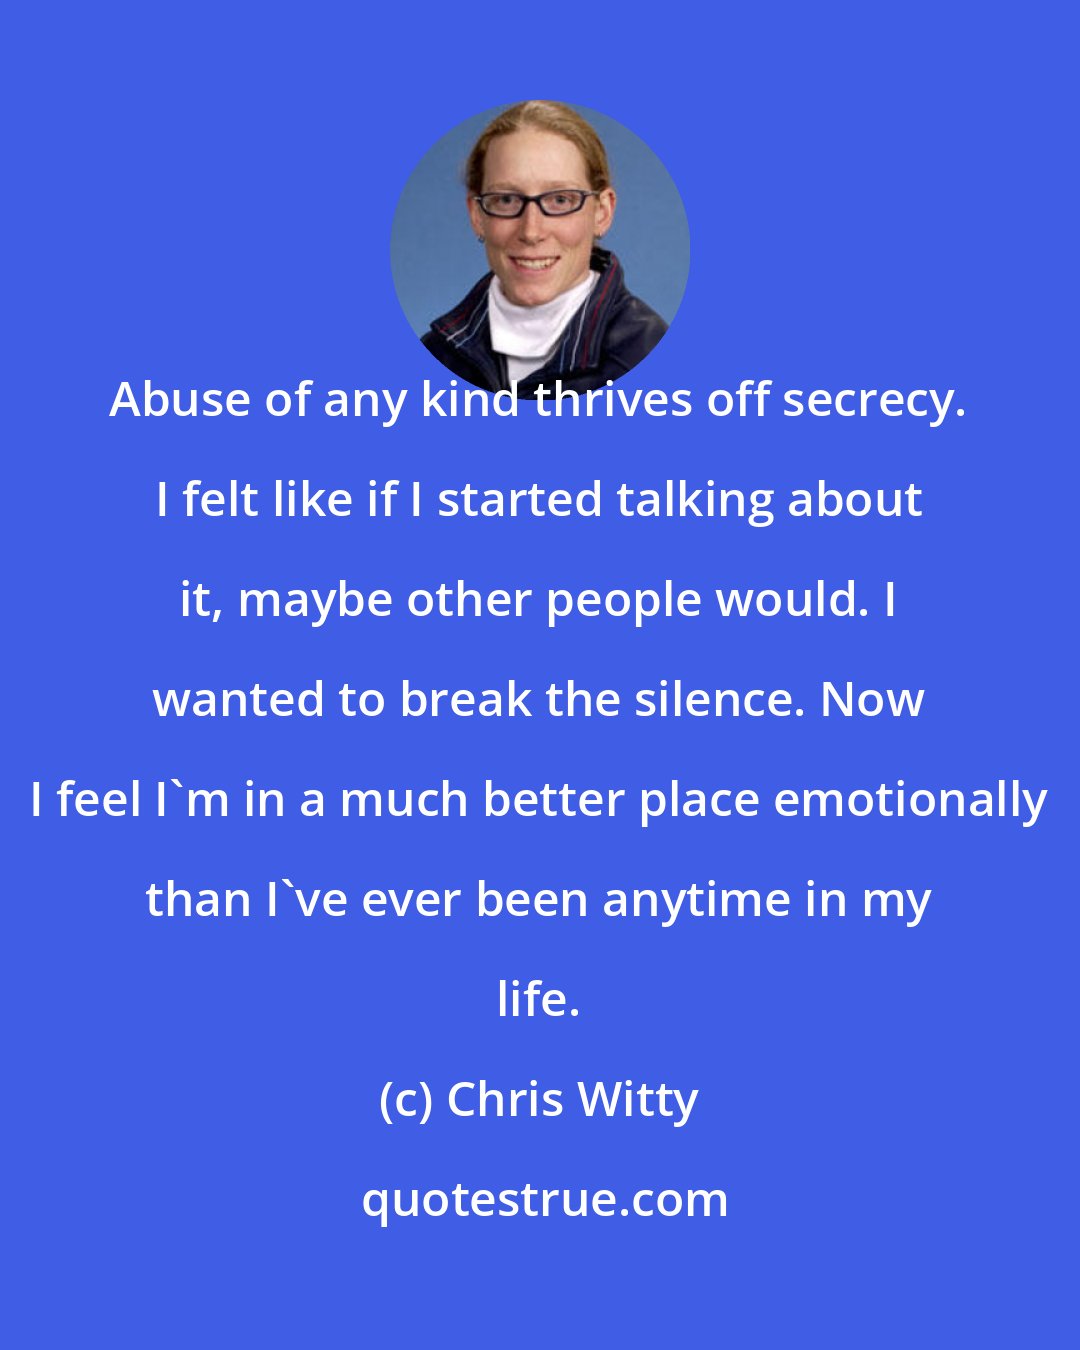 Chris Witty: Abuse of any kind thrives off secrecy. I felt like if I started talking about it, maybe other people would. I wanted to break the silence. Now I feel I'm in a much better place emotionally than I've ever been anytime in my life.